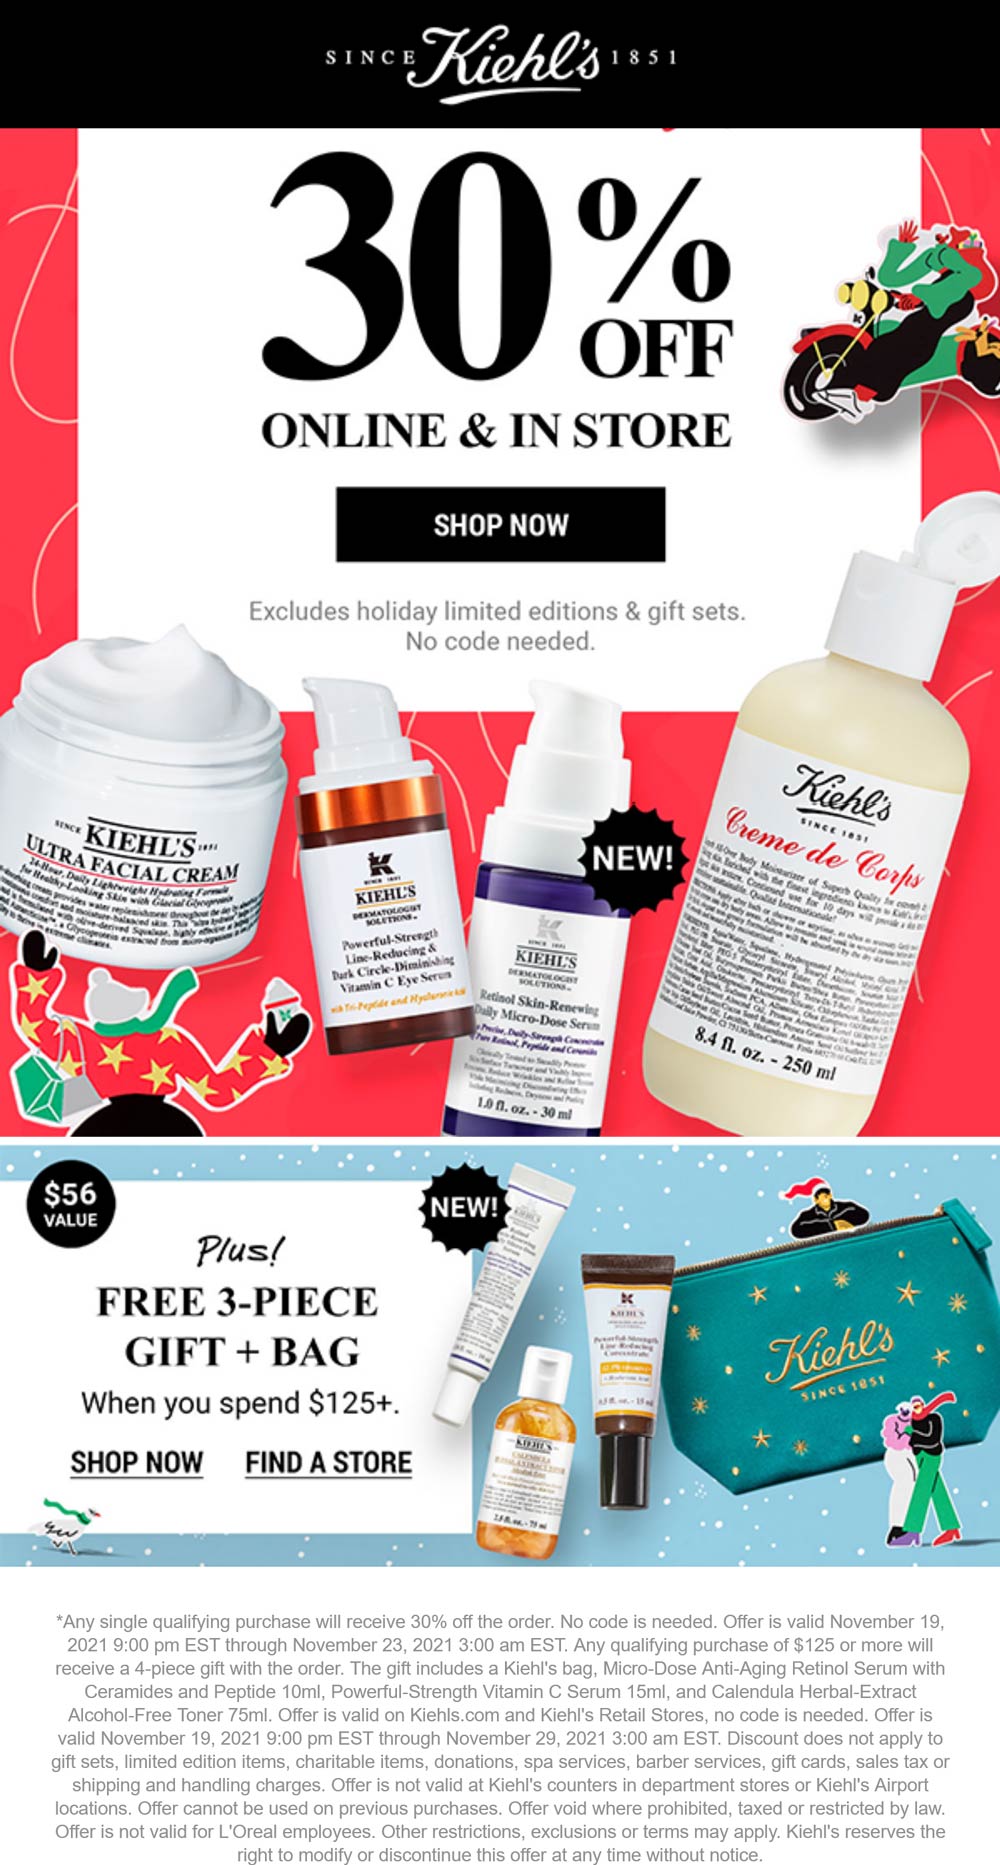 Kiehls stores Coupon  30% off today at Kiehls, ditto online #kiehls 